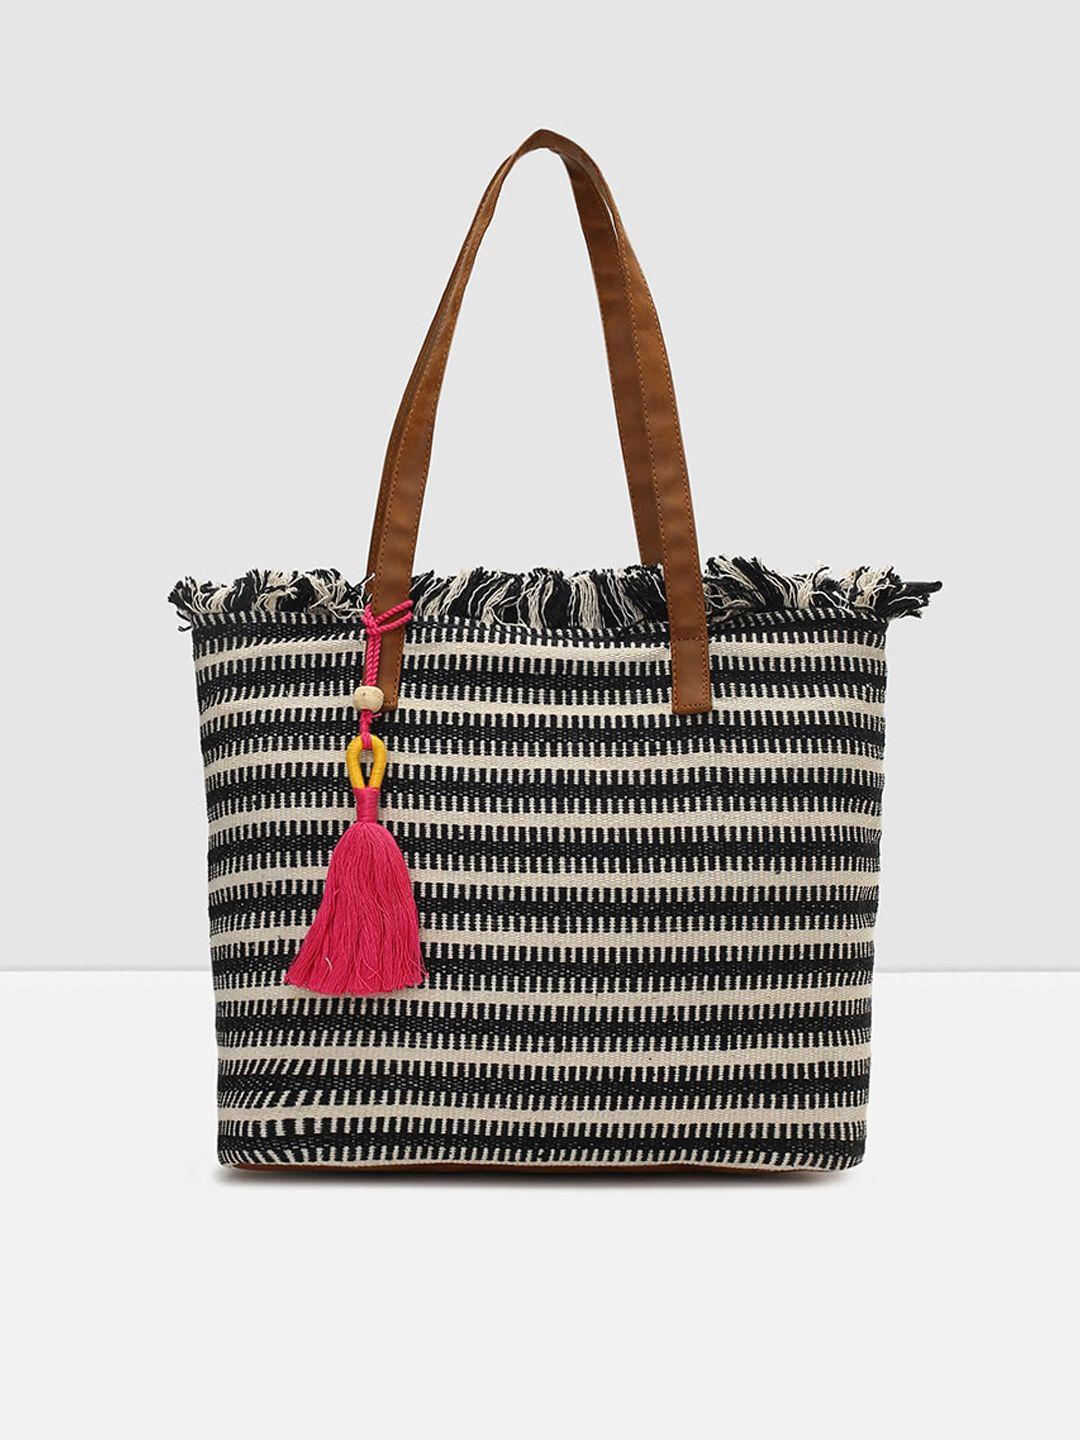 max shopper tote bag with tasselled